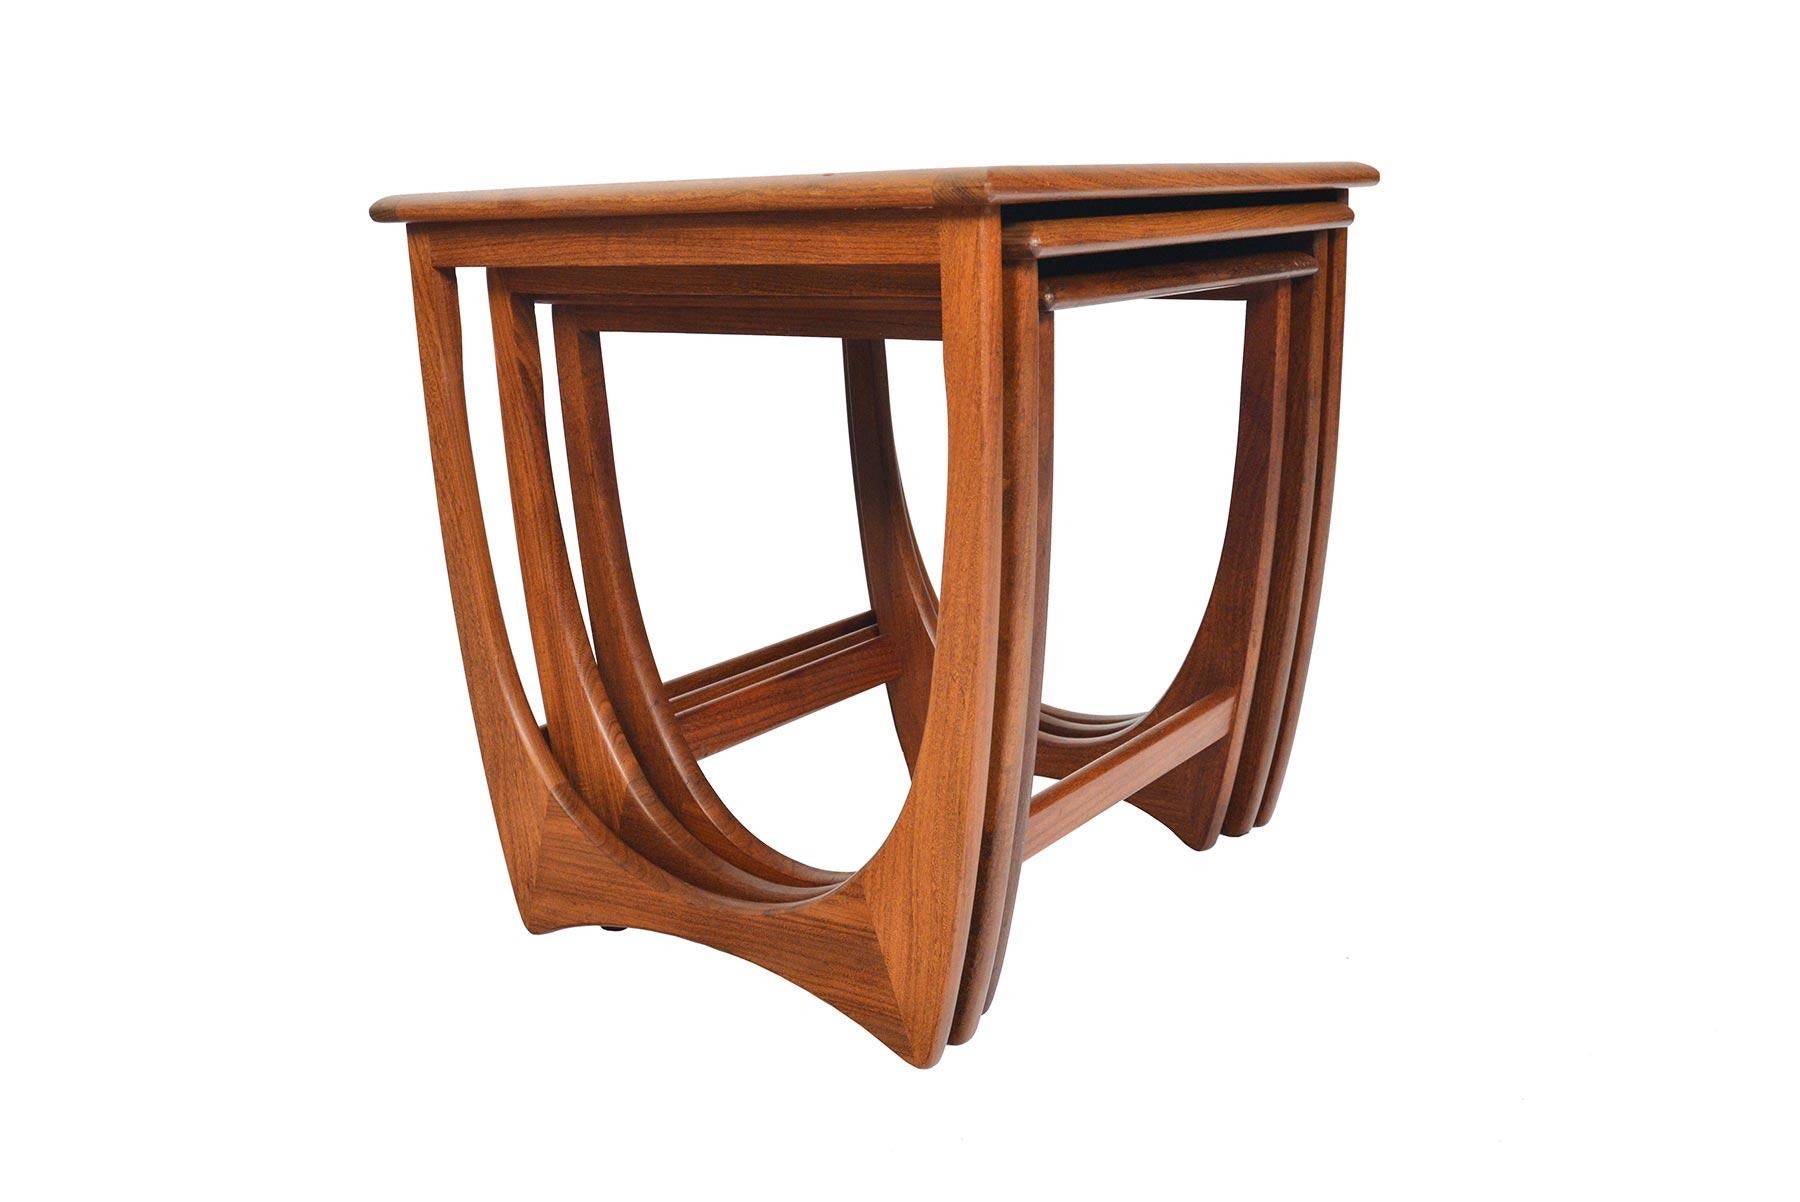 This timeless set of Mid-Century Modern G Plan Astro teak nesting tables was designed by Victor Wilkins in the 1960s. Gorgeous design and exceptional construction throughout. In excellent original condition.